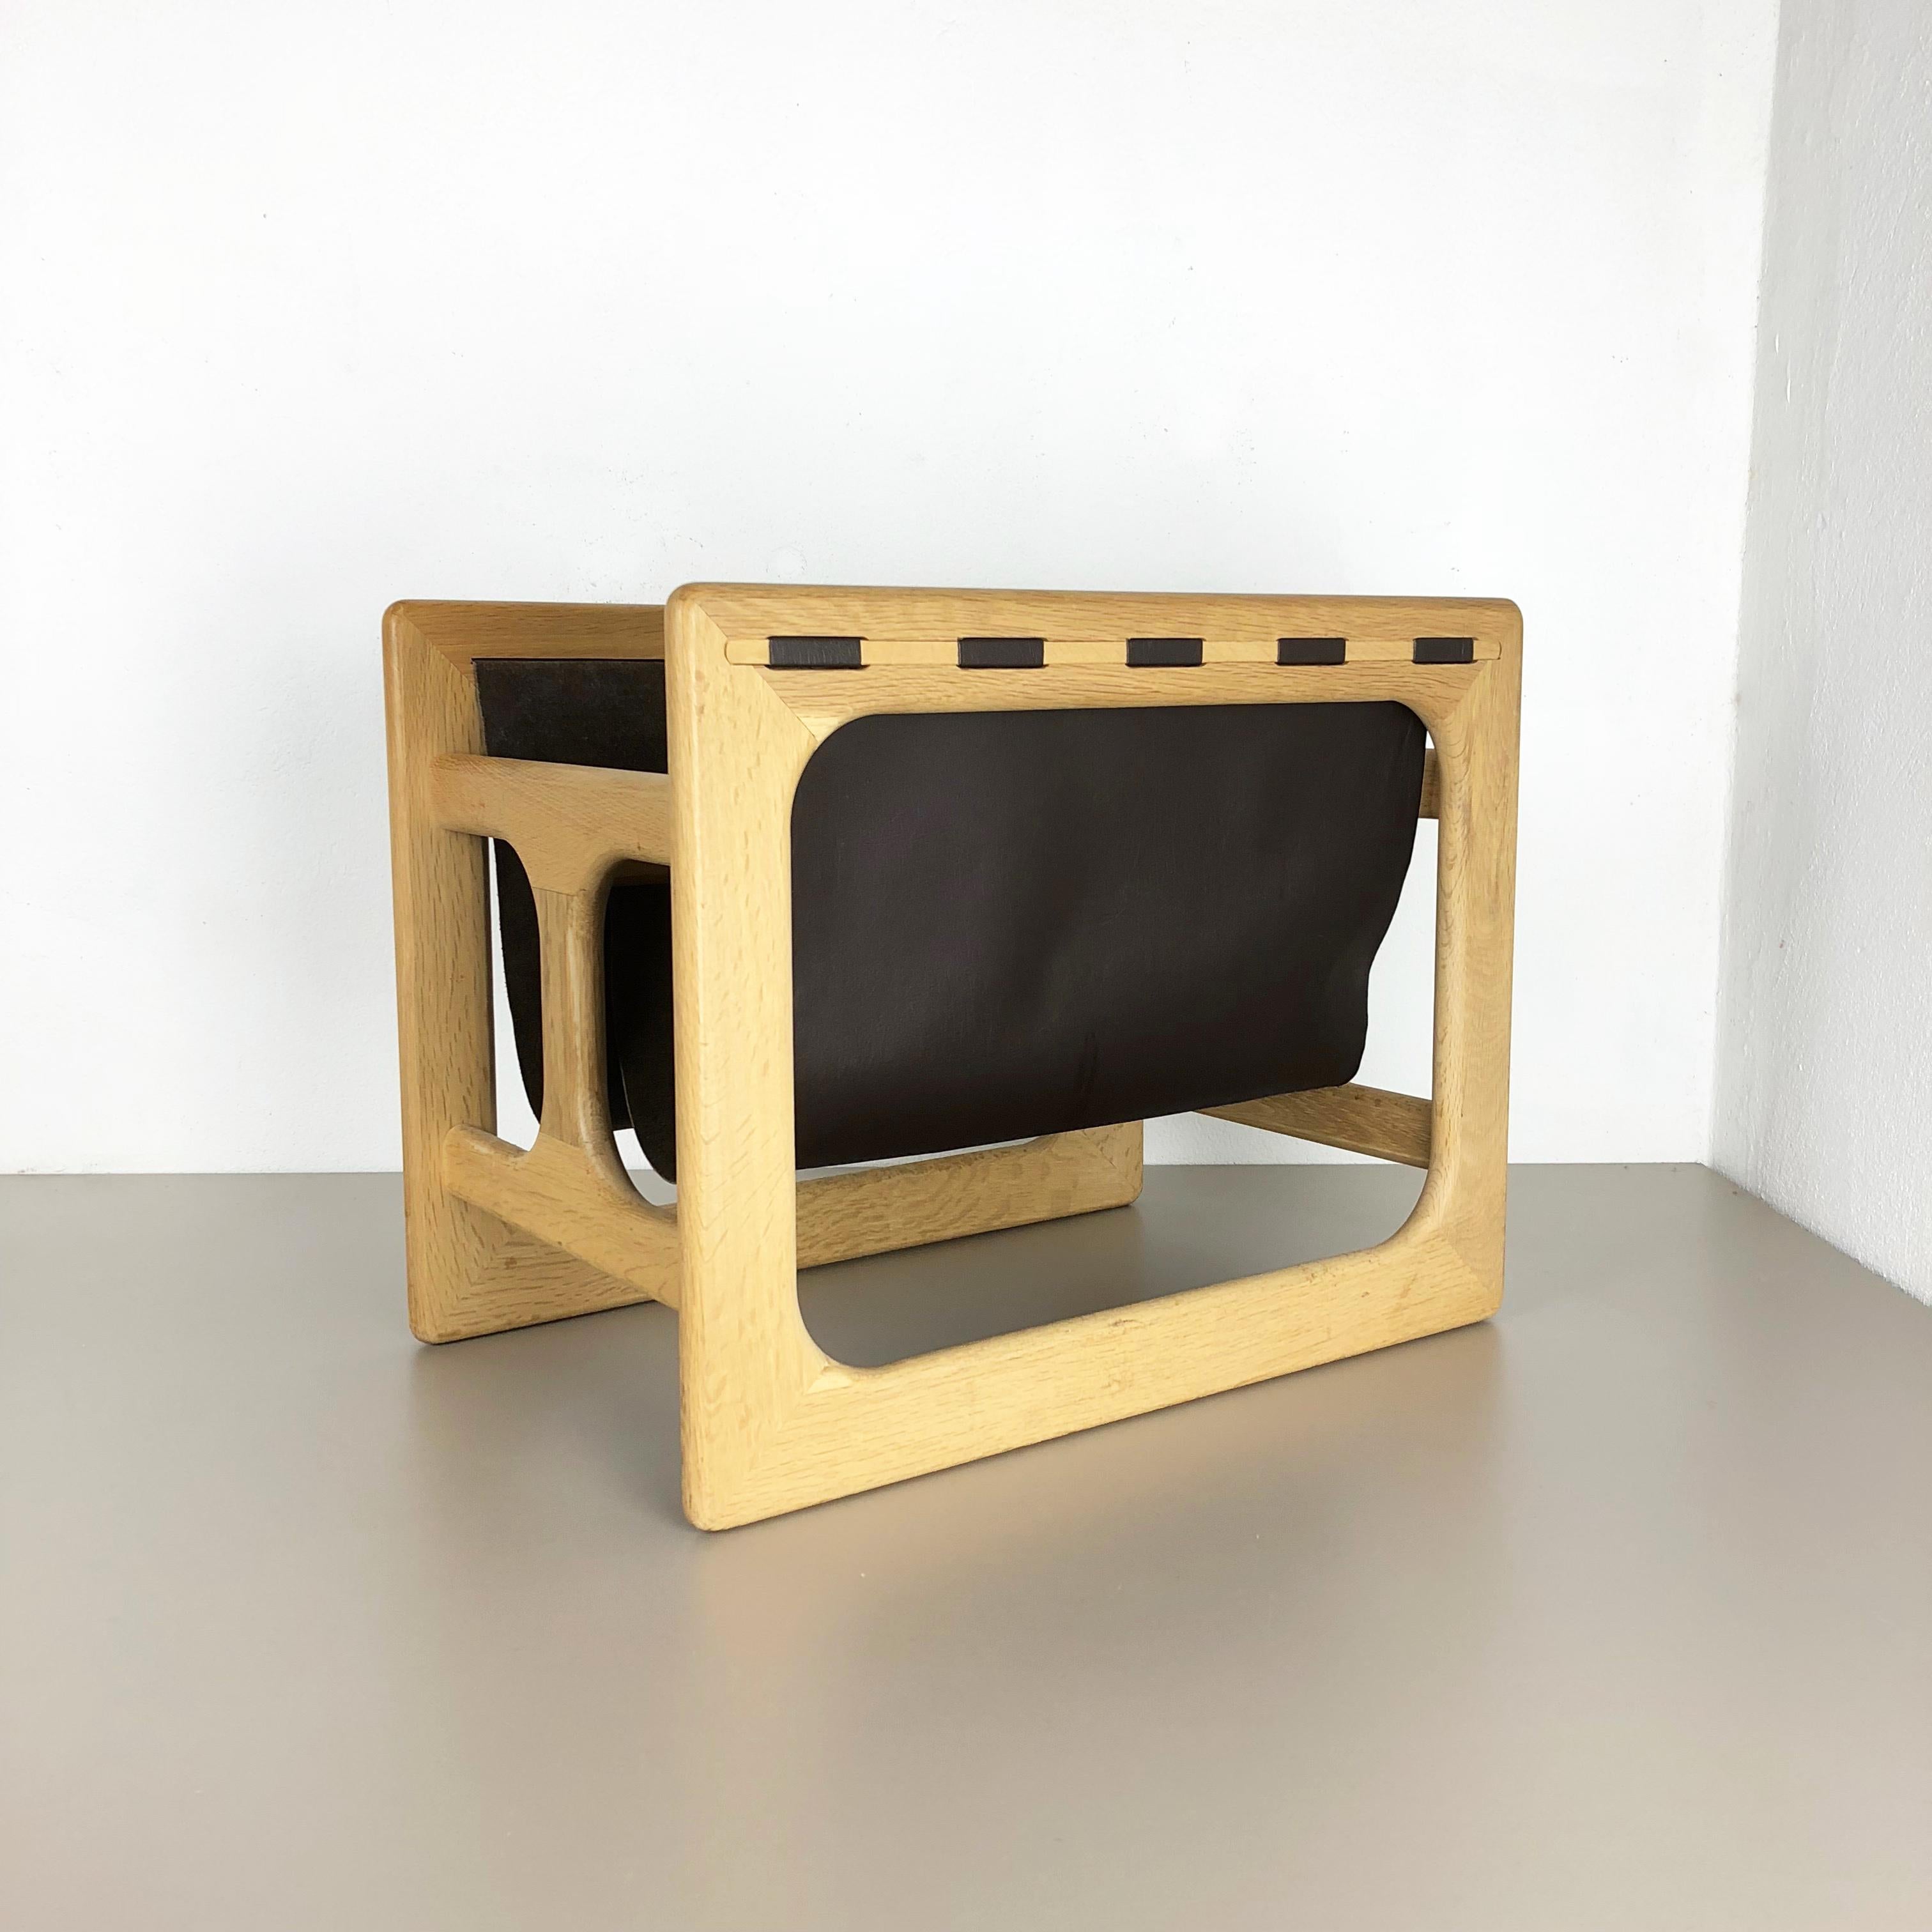 Article: Magazine rack

Producer: Salin Møbler, Denmark

Origin: Denmark

Age: 1970s

Description: original 1960s magazine rack made by Salin Mobler, Denmark. the frame is made of solid oakwood wood with real leather hanging compartments.